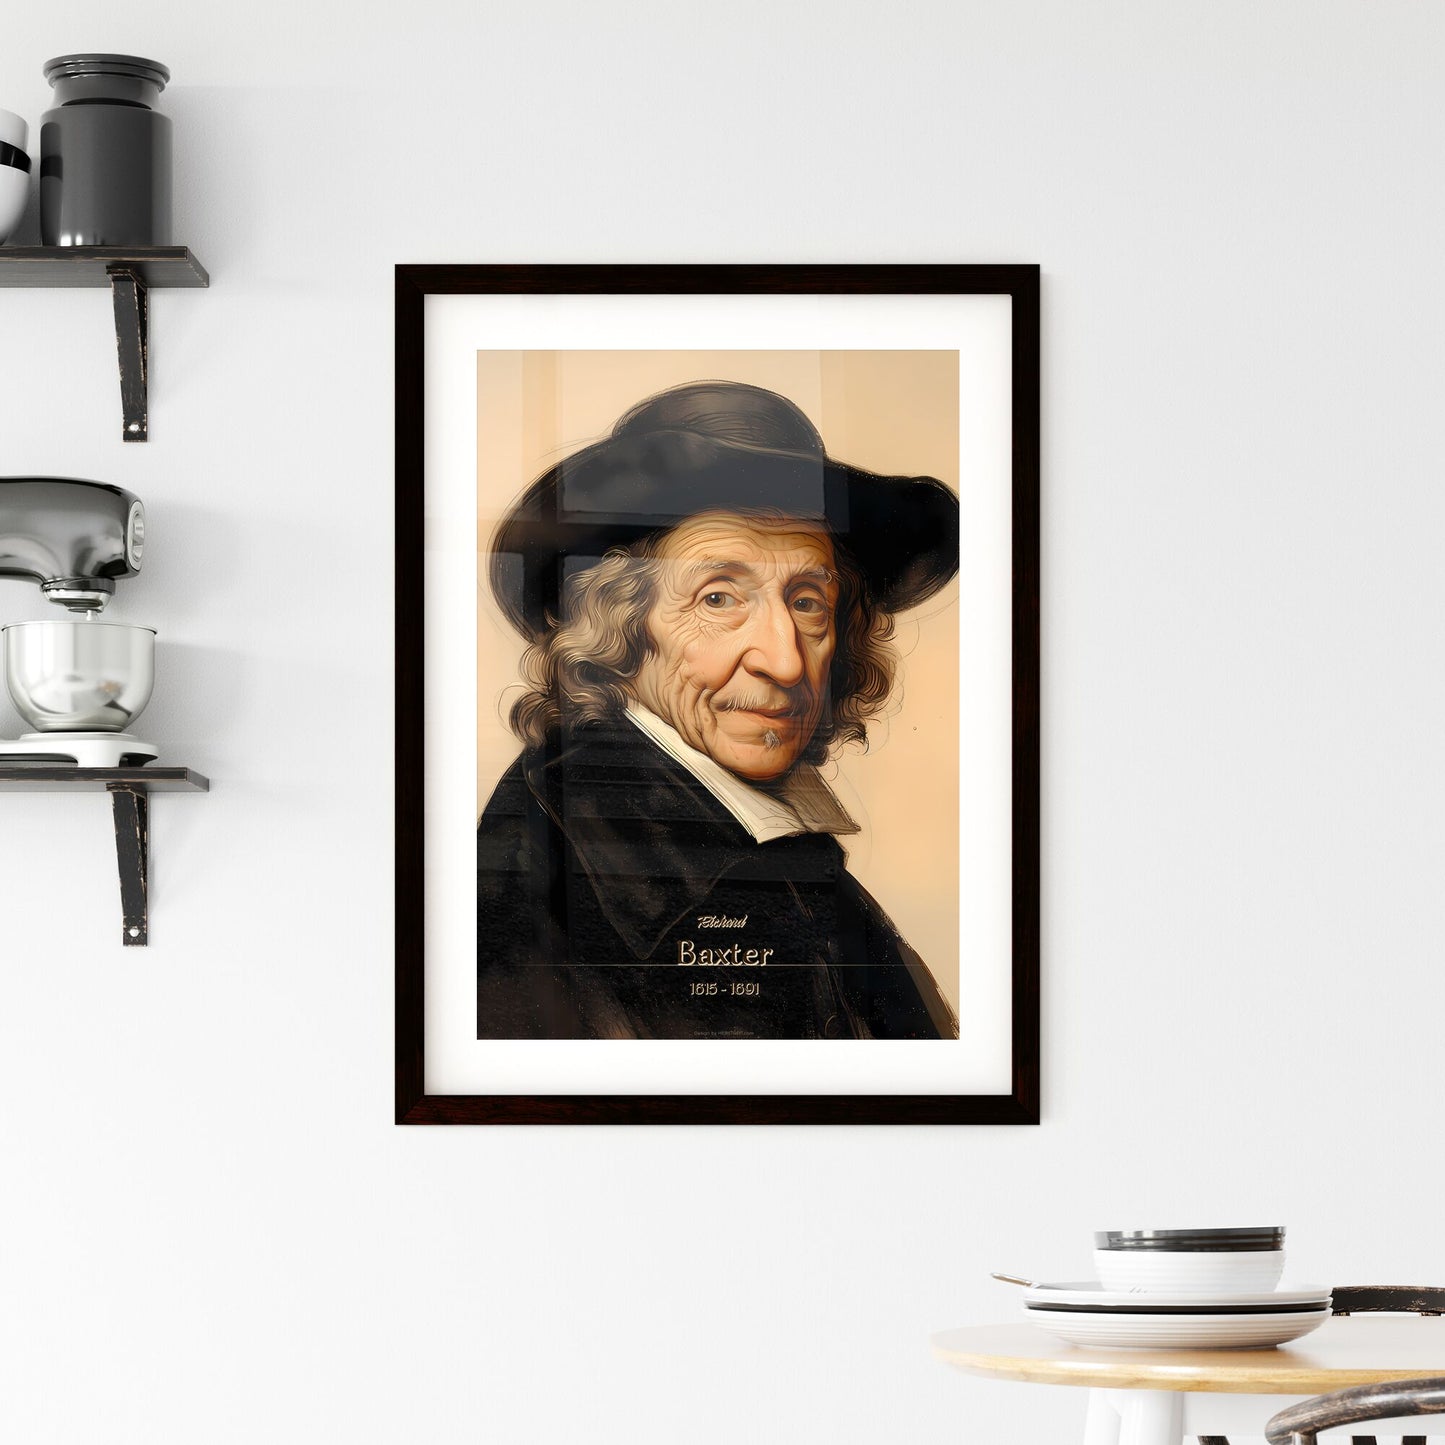 Richard, Baxter, 1615 - 1691, A Poster of a man in a hat Default Title